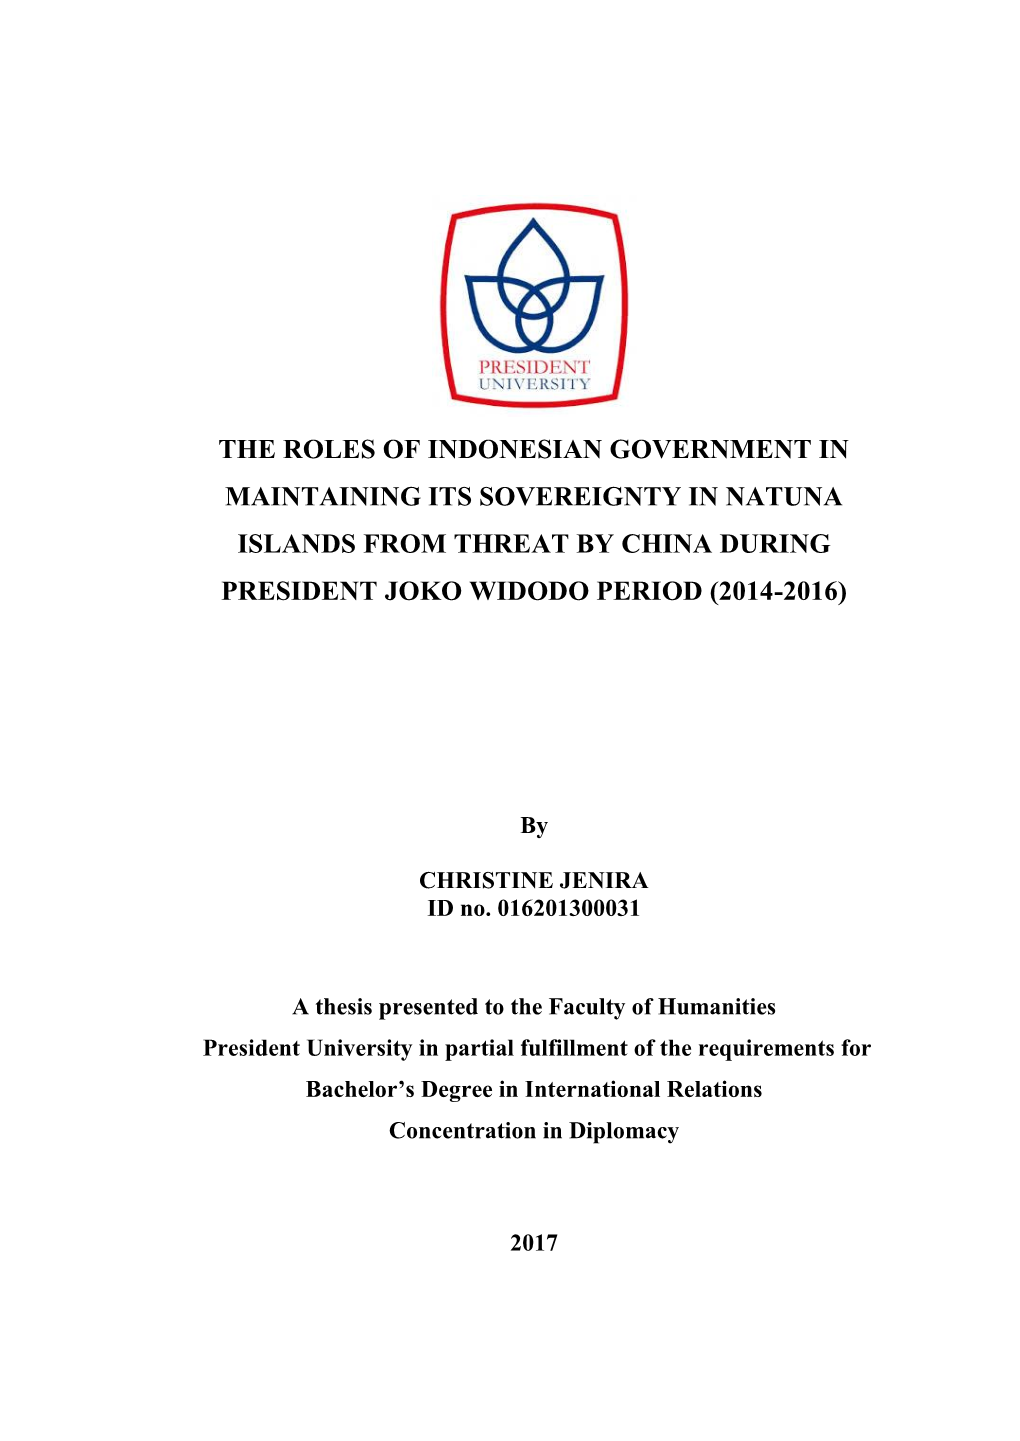 The Roles of Indonesian Government in Maintaining Its Sovereignty in Natuna Islands from Threat by China During President Joko Widodo Period (2014-2016)